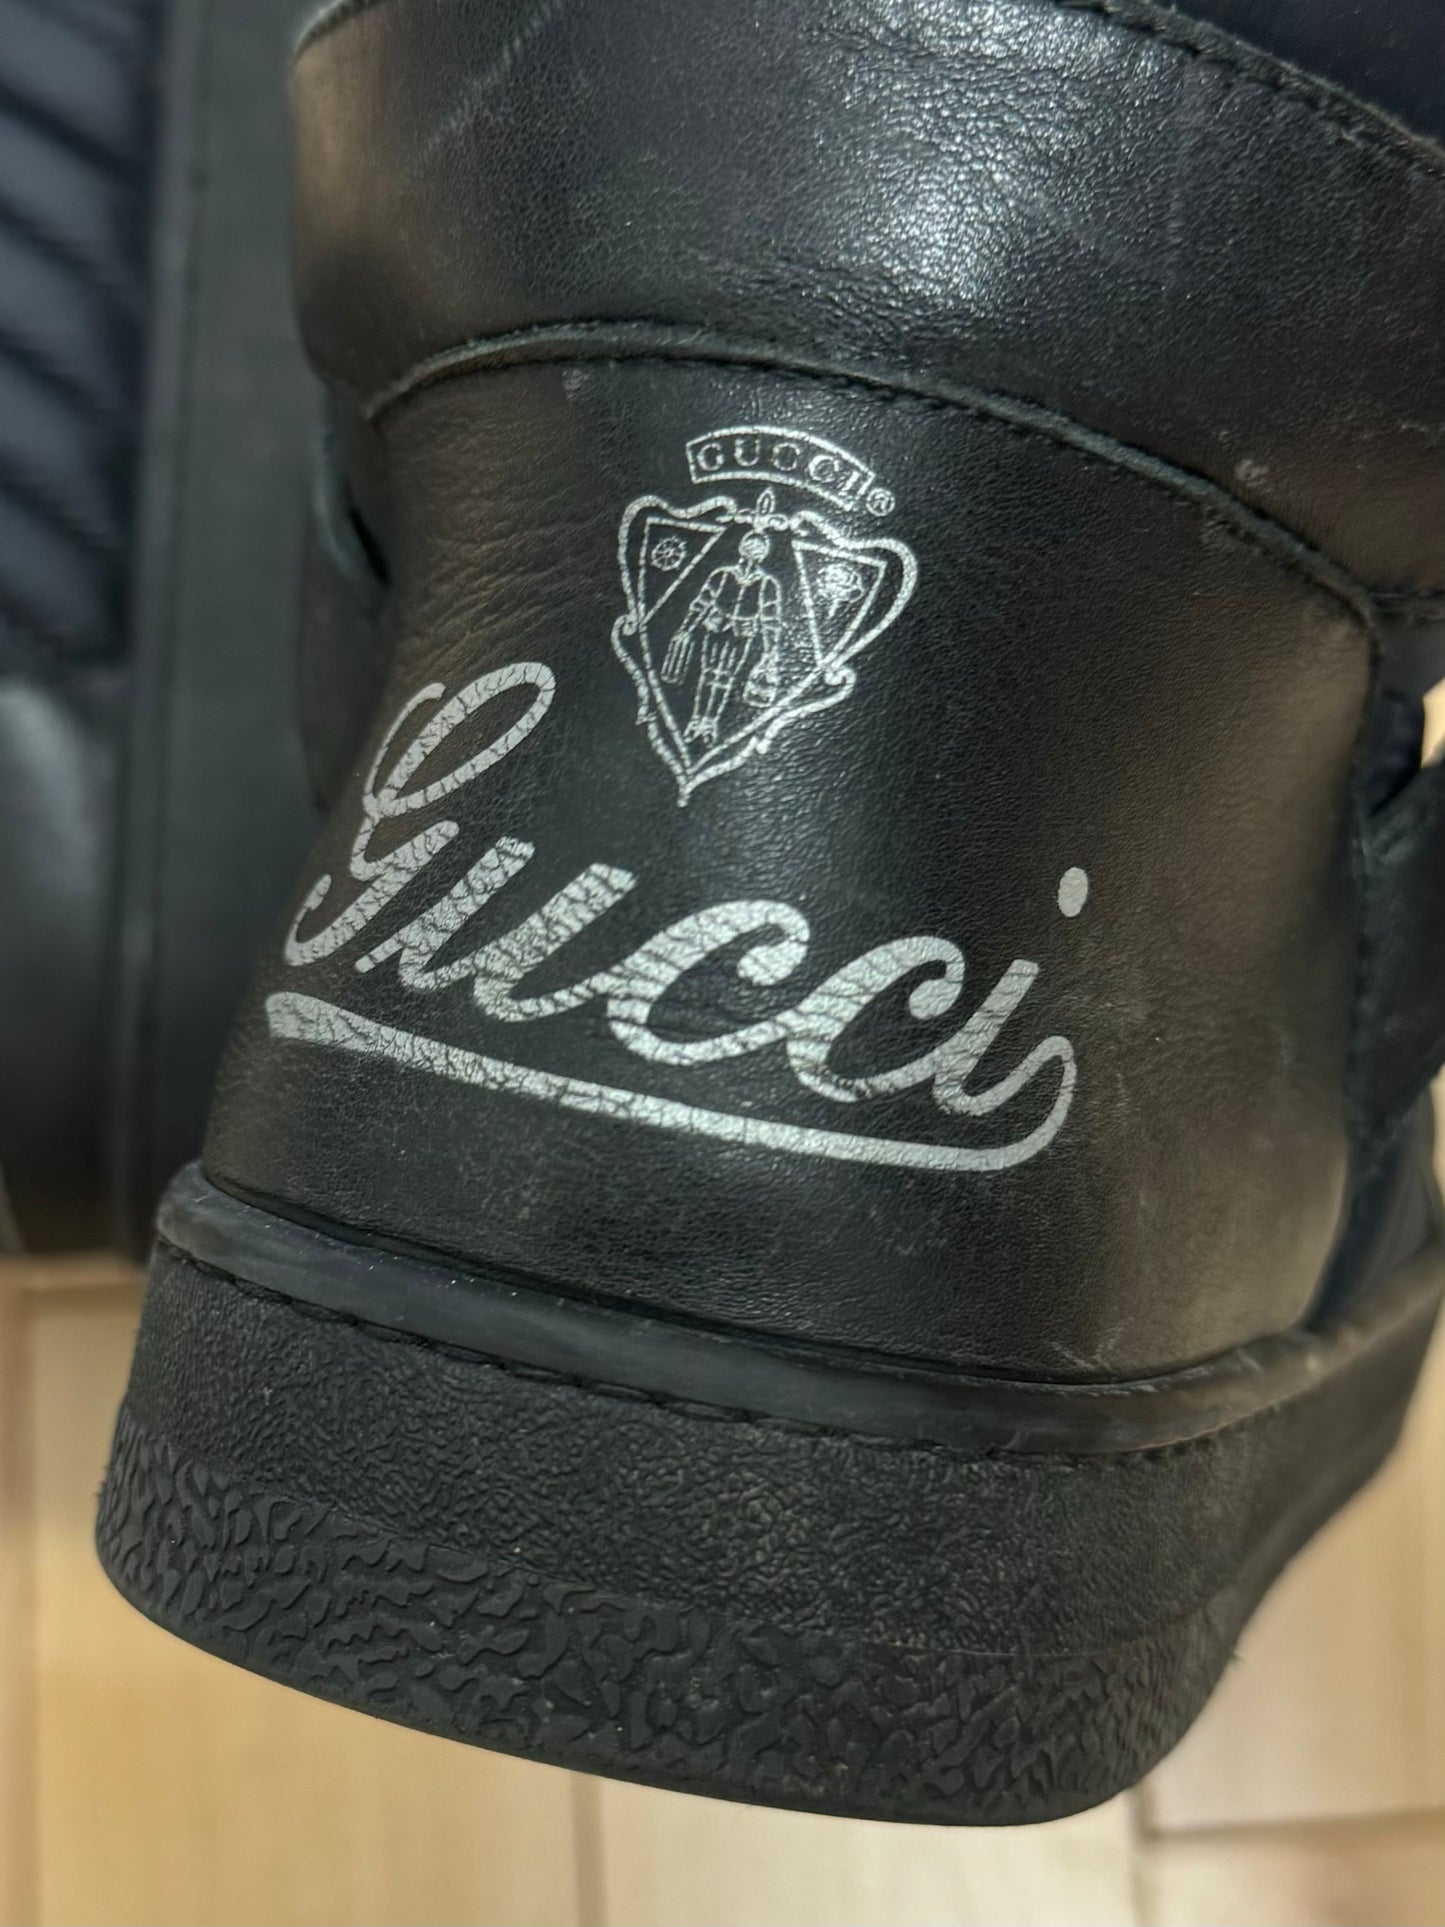 Gucci ‘Hudson’ Black Leather High Top Sneakers